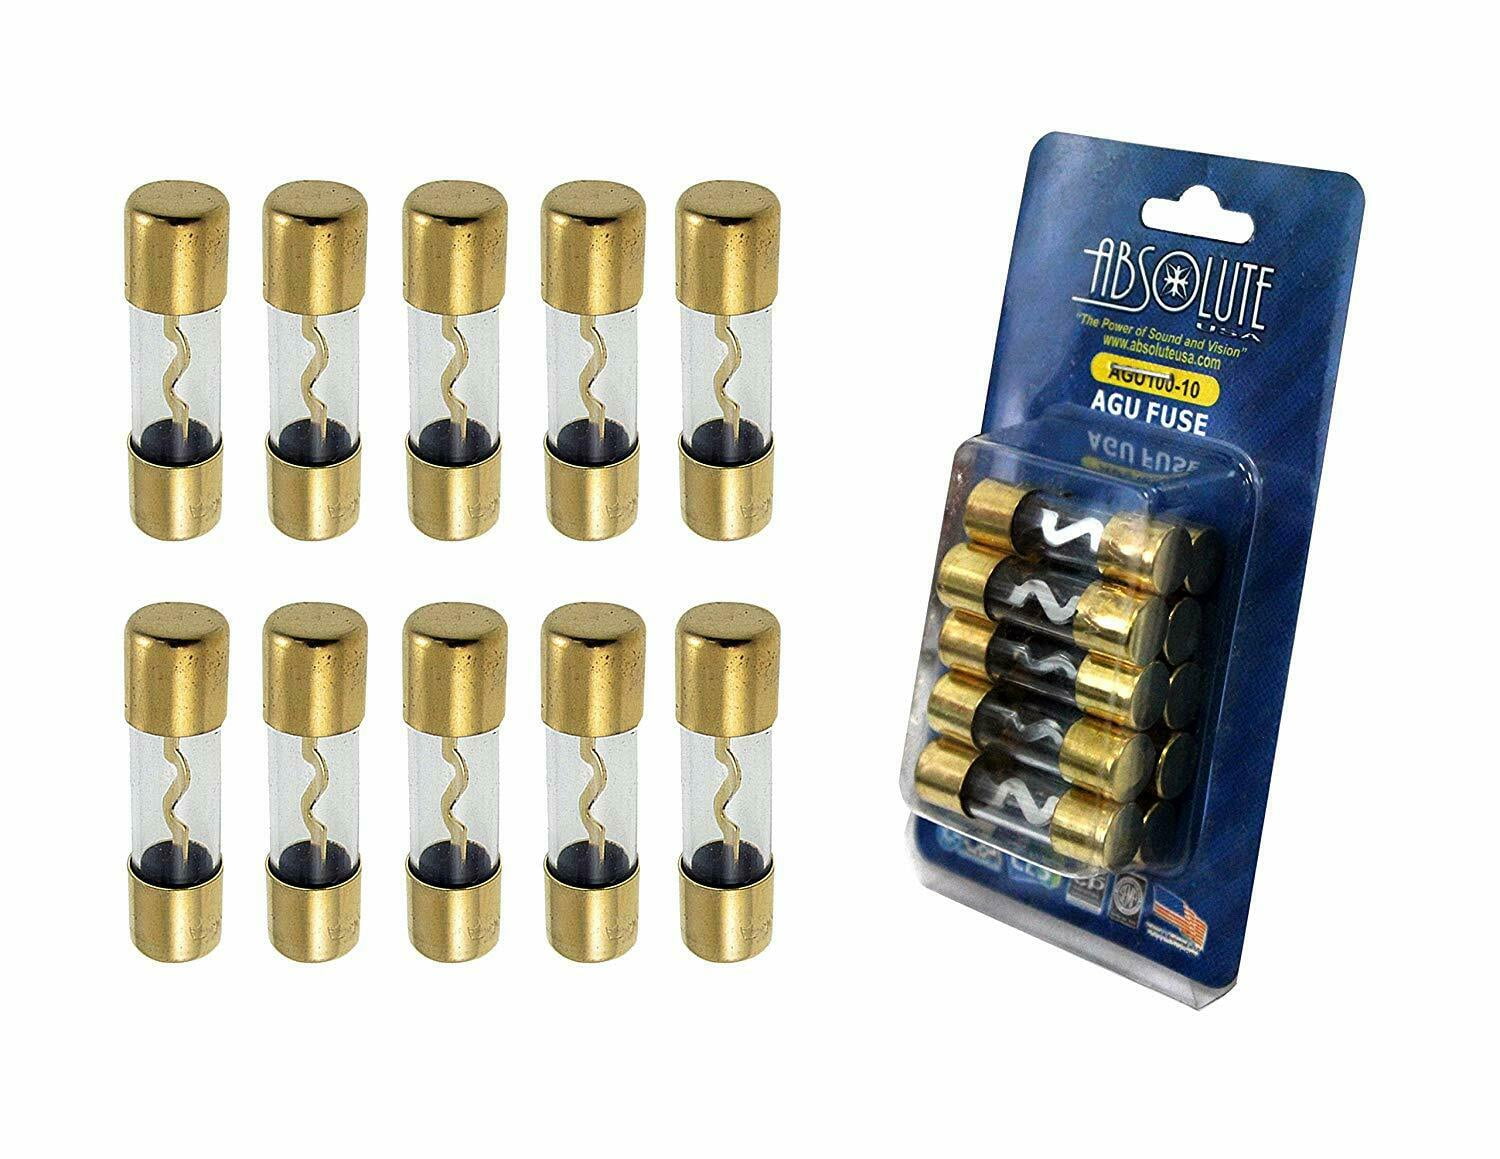 AGU Fuse 20pcs Reliable 40 Amp Glass Fuses GOLD Plated Marine Car Motorcycle USA 